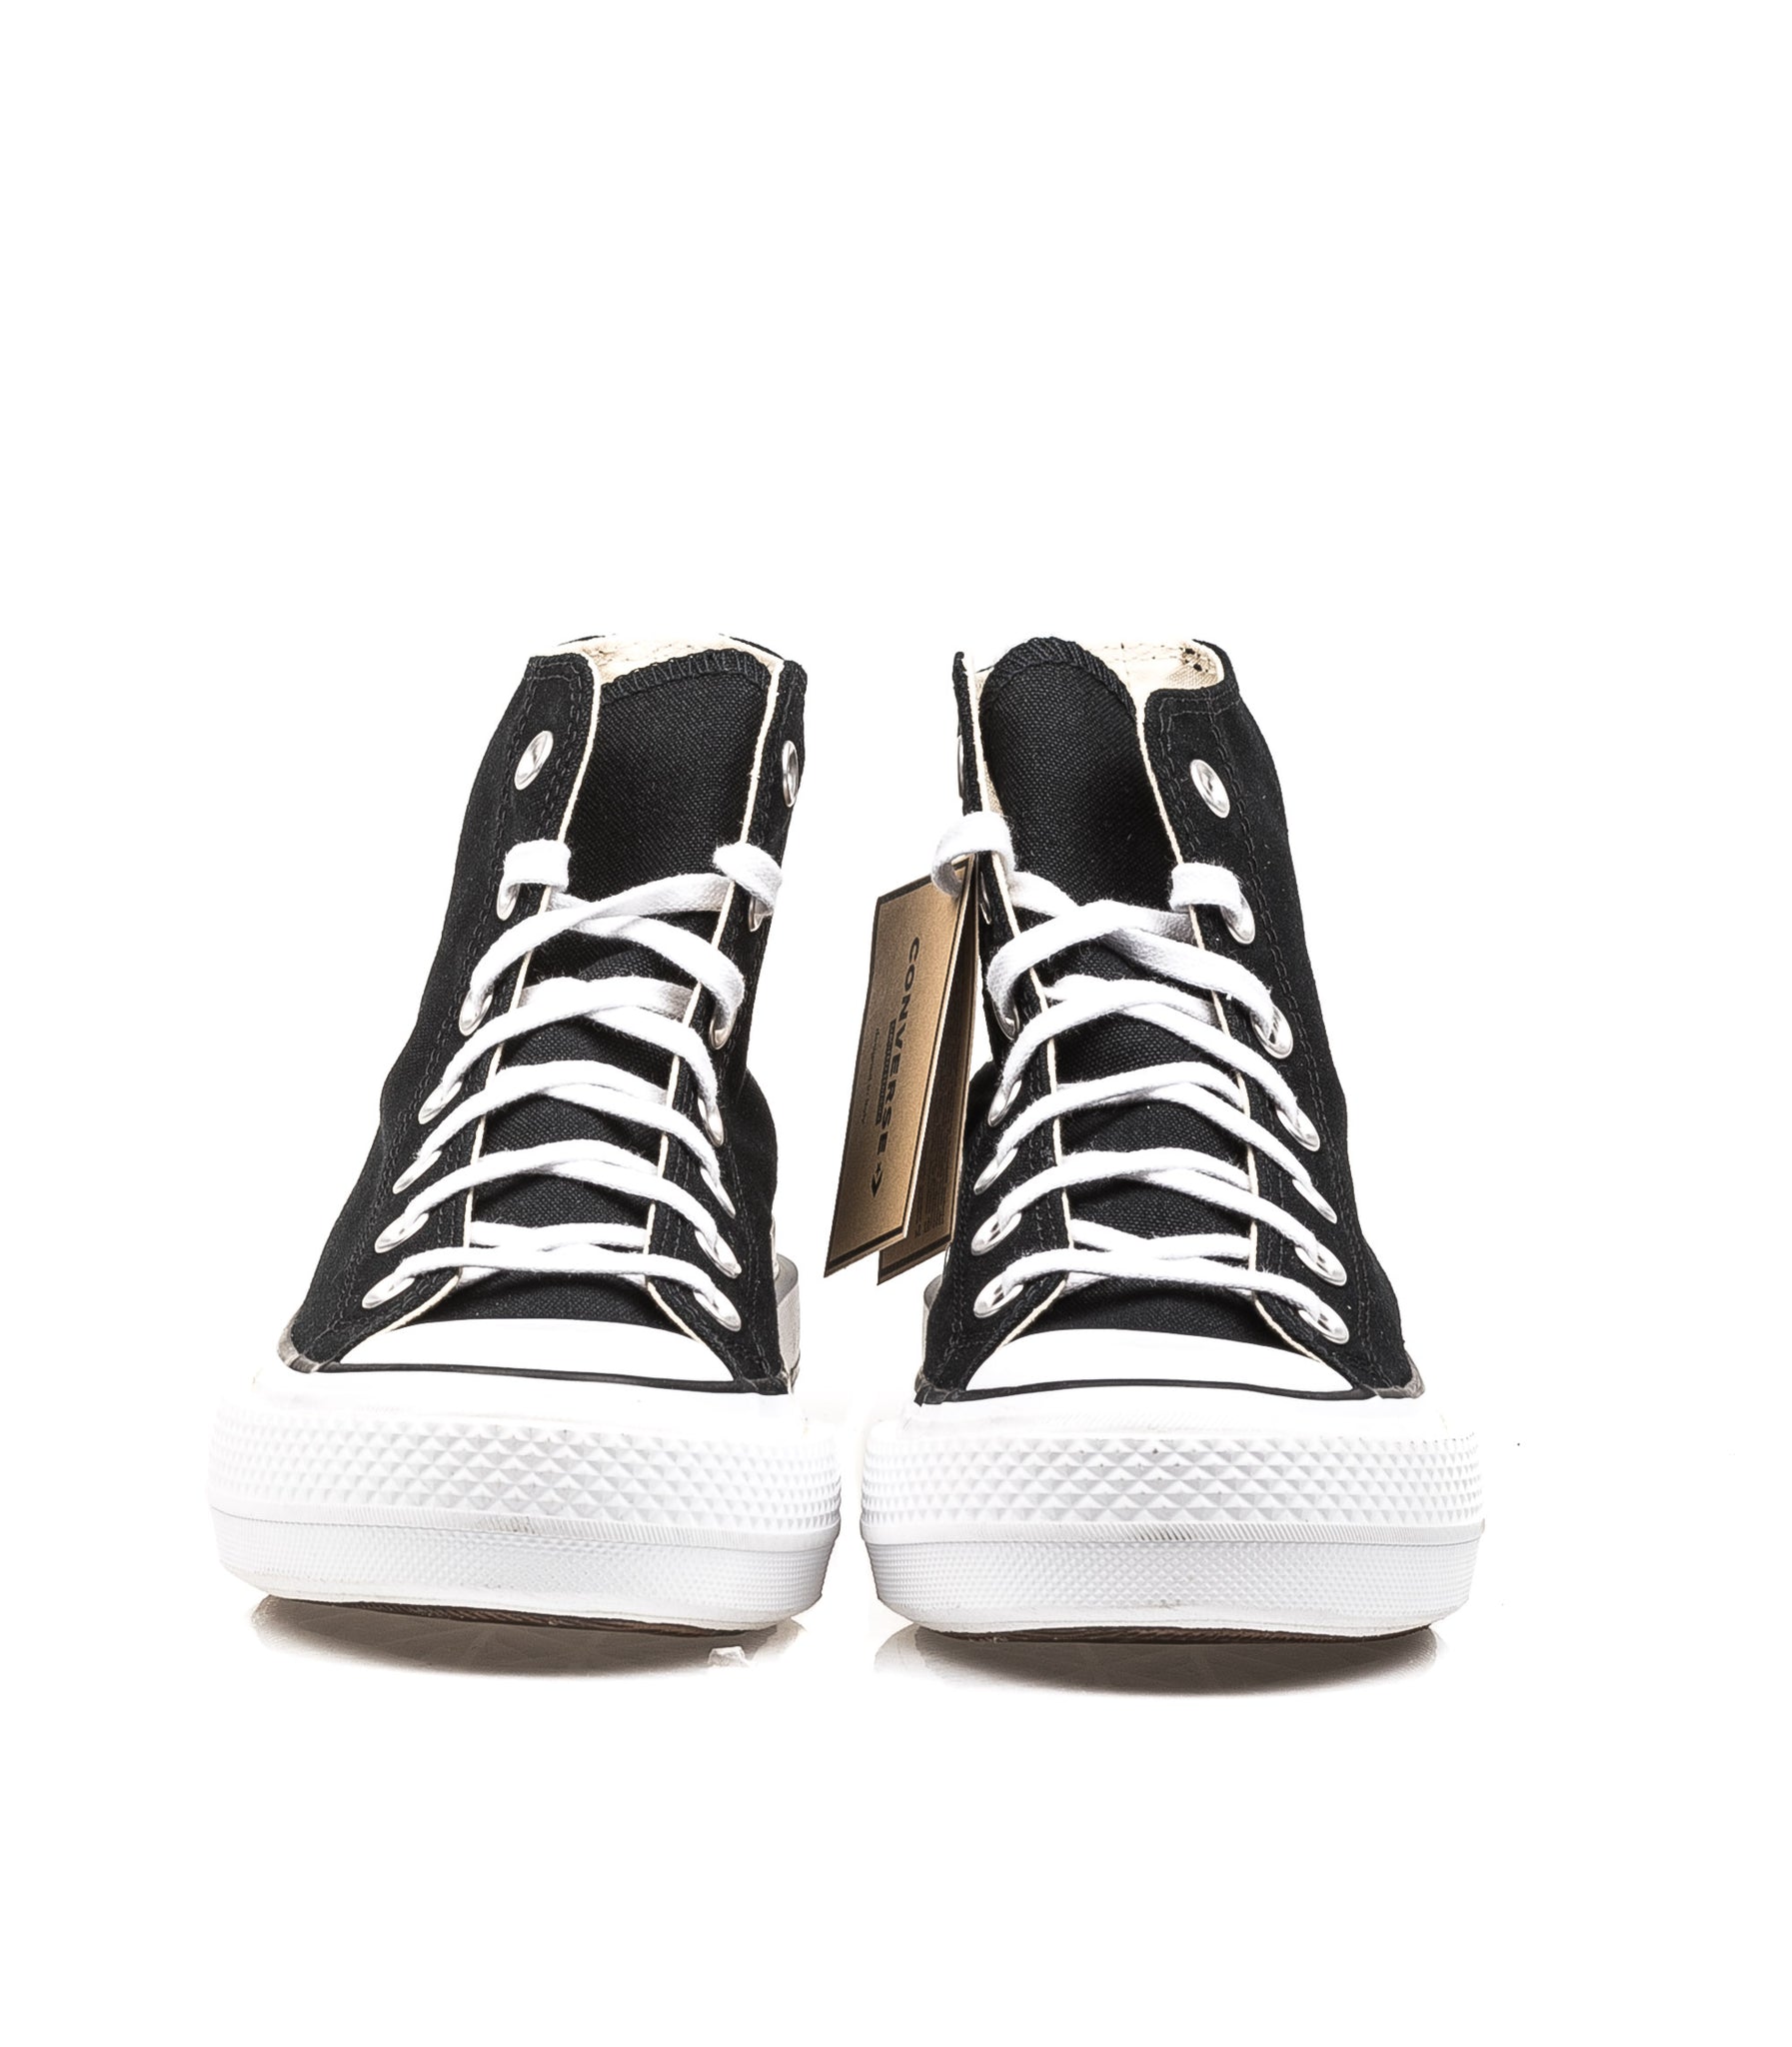 Converse Chuck Taylor All Star Highstep Ltd Black Double Foxing Nero Donna